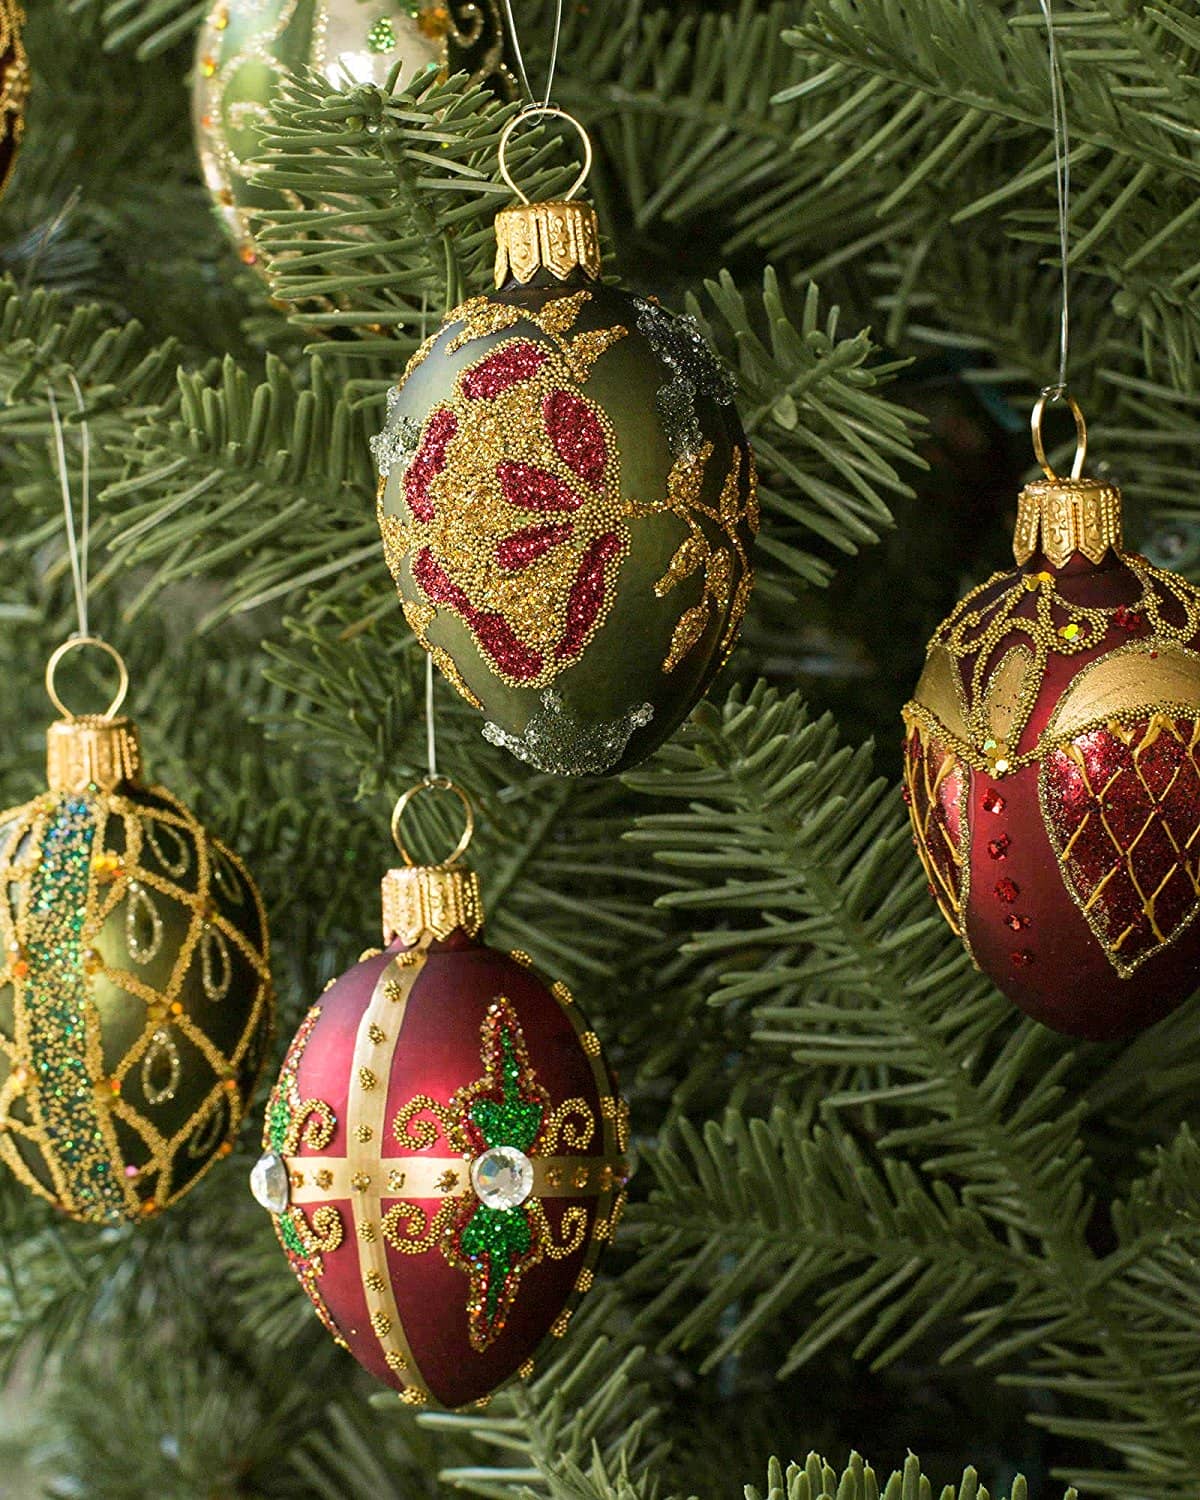 Christmas Tree Ideas With Big Ornaments